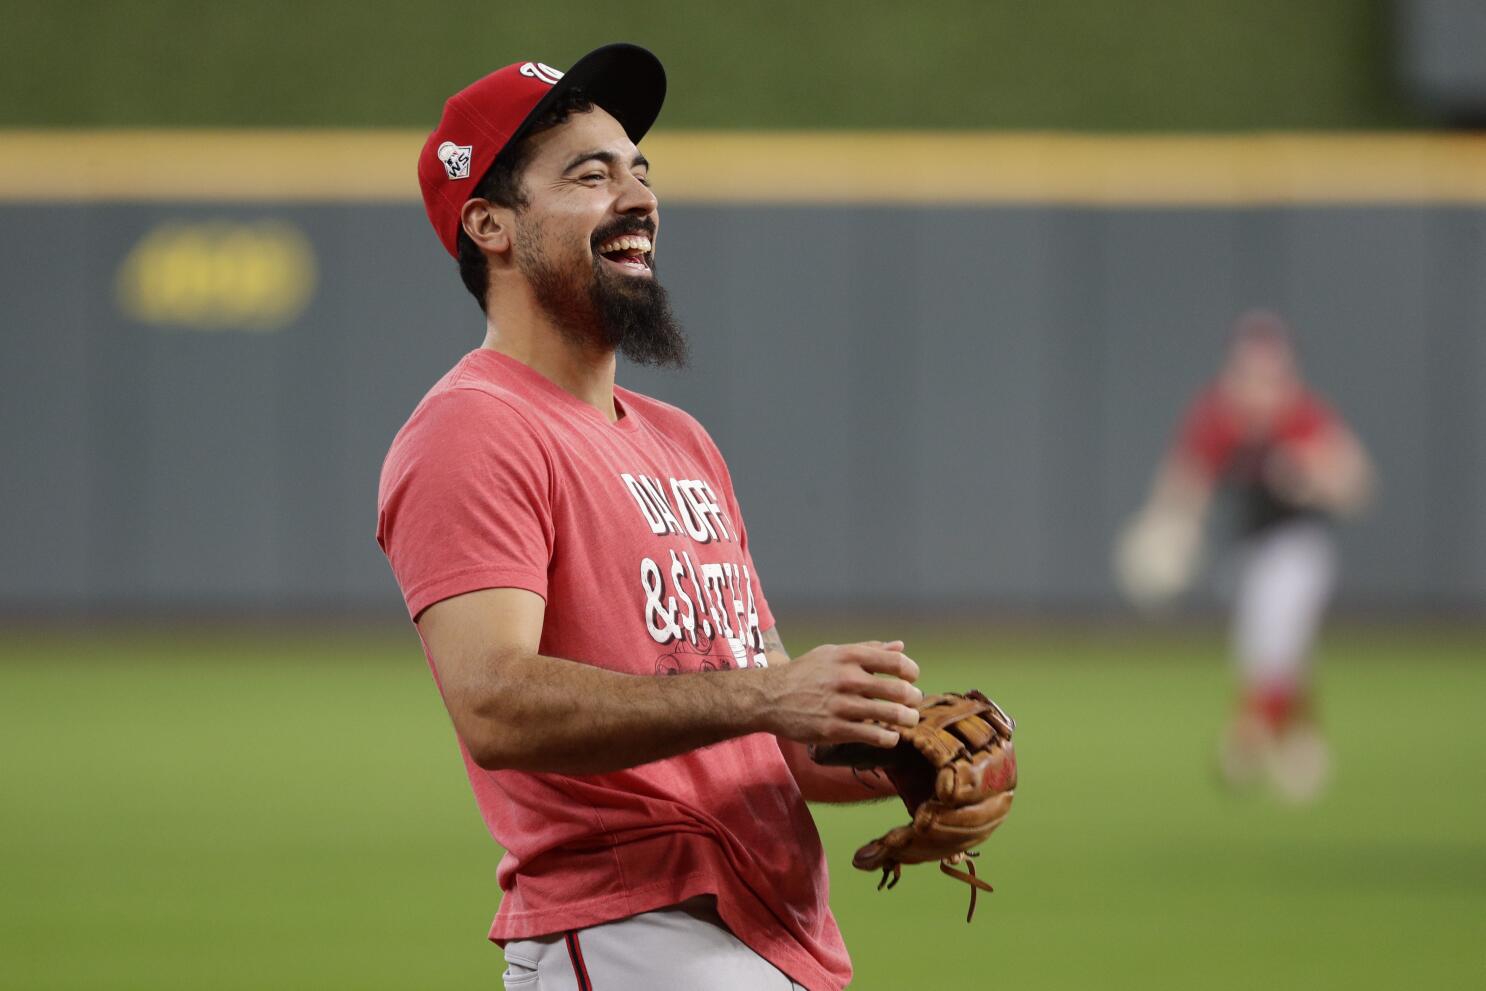 This is a 2019 photo of Anthony Rendon of the Washington Nationals